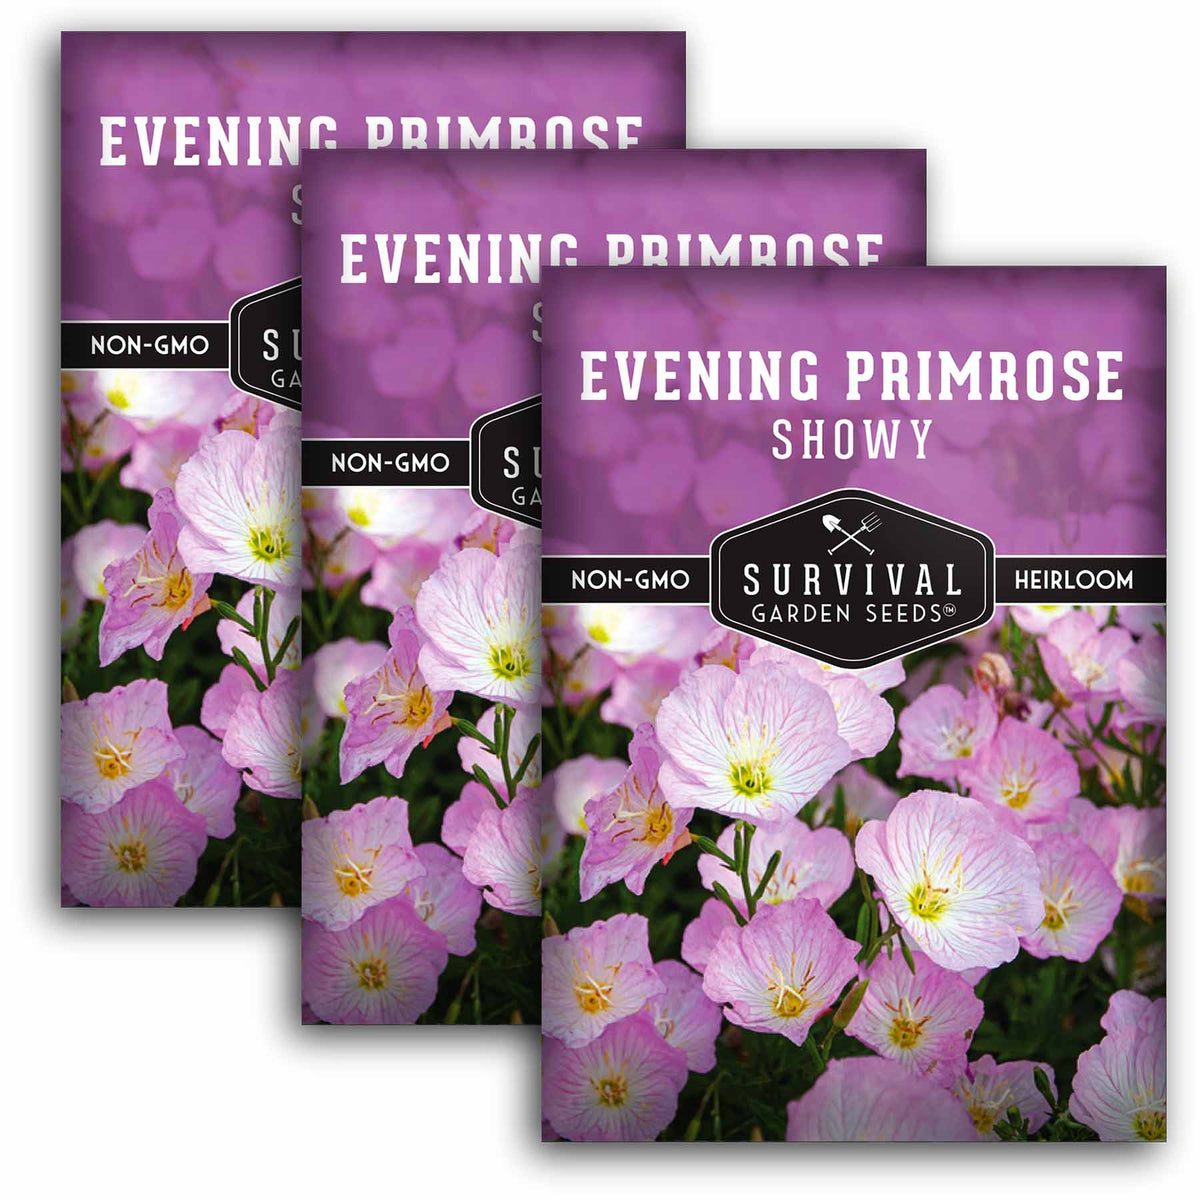 3packets of Showy Evening Primrose seeds